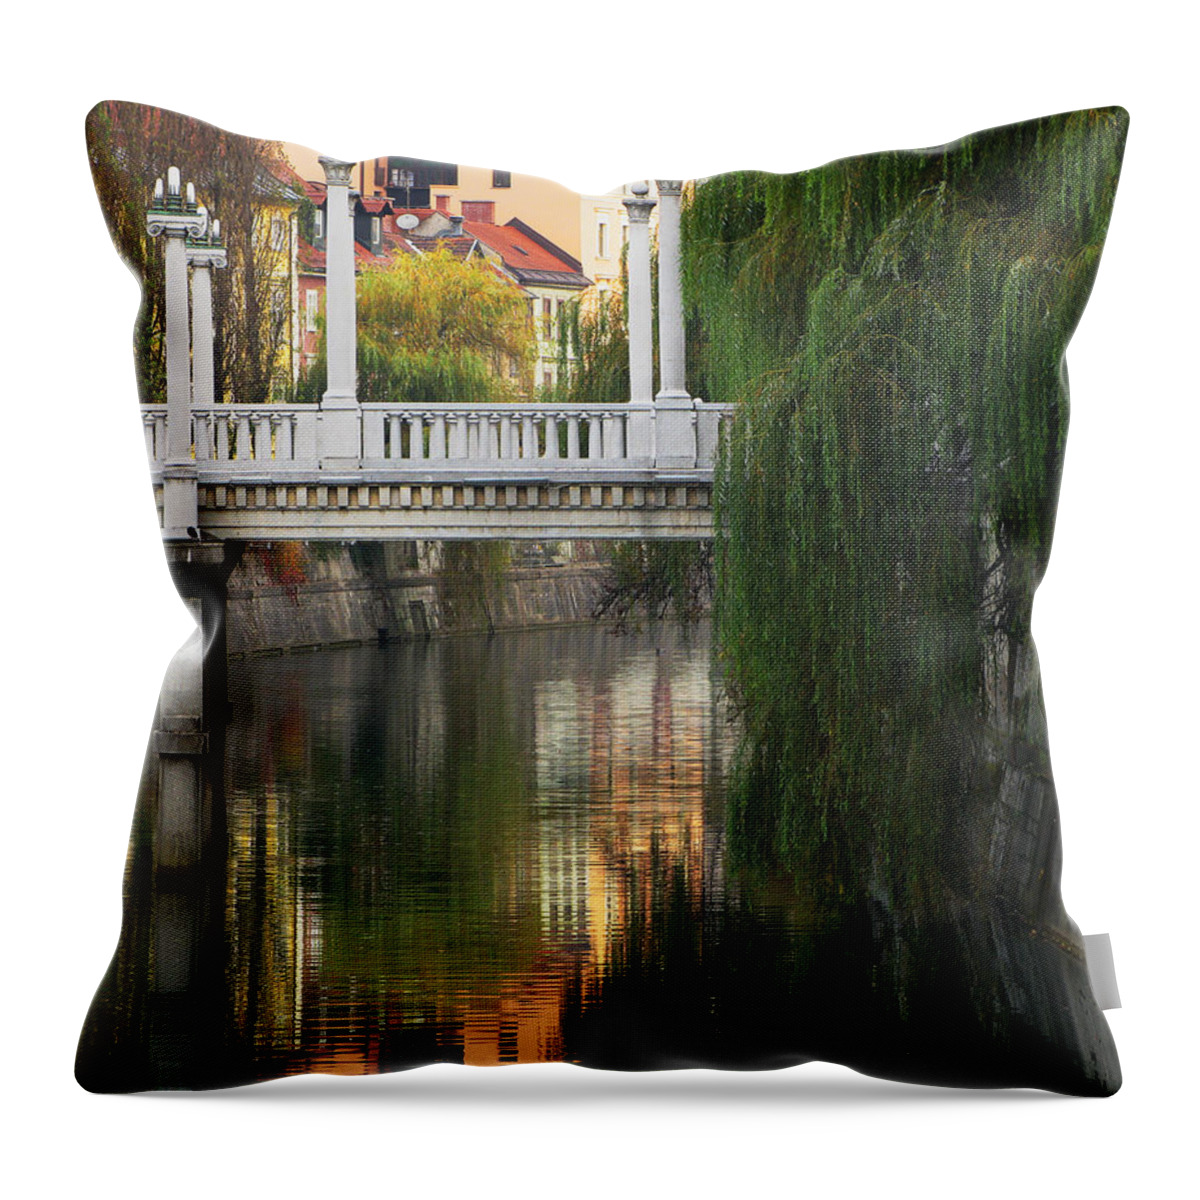 Cobblers Bridge Throw Pillow featuring the photograph Cobblers Bridge and Morning Reflections in Ljubljana by Greg Matchick